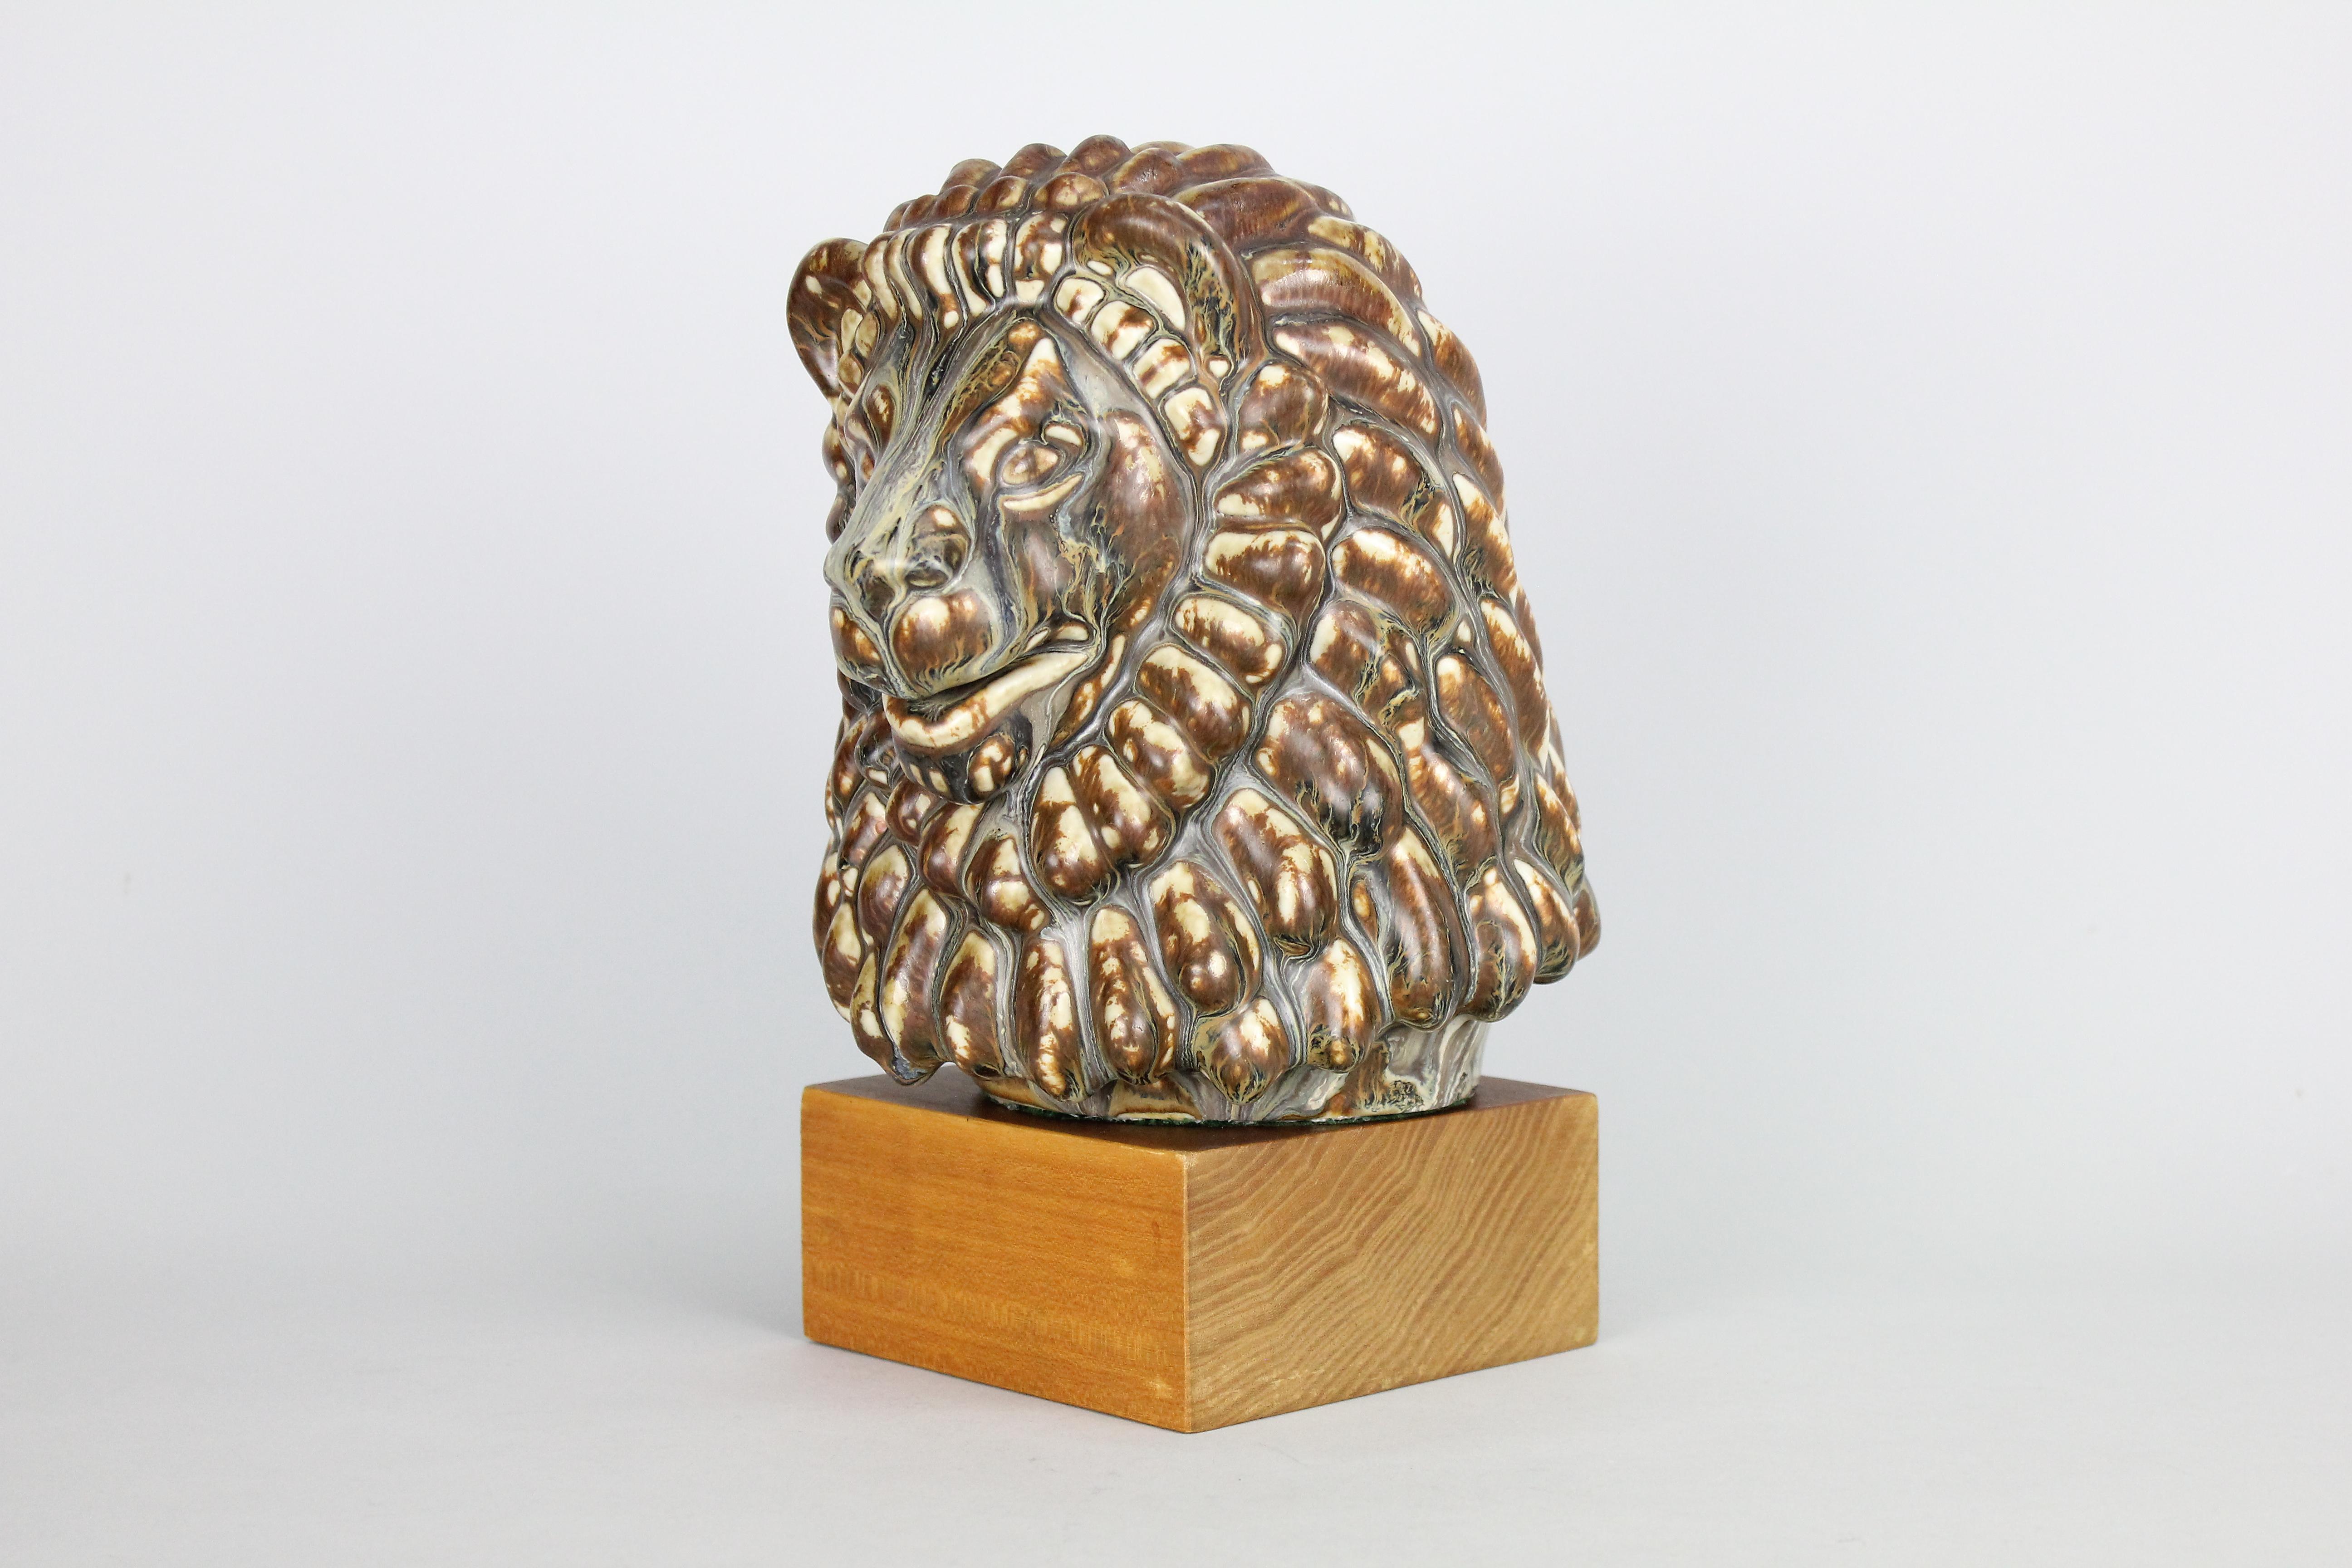 Stunning lions head by Gunnar Nylund for Rörstrand. The condition, glaze, and the colors are exquisite.
Fully signed with Gunnar Nylund initials and Rörstrand mark.
The lions head can be on the wooden base or standing on its own.
The base is